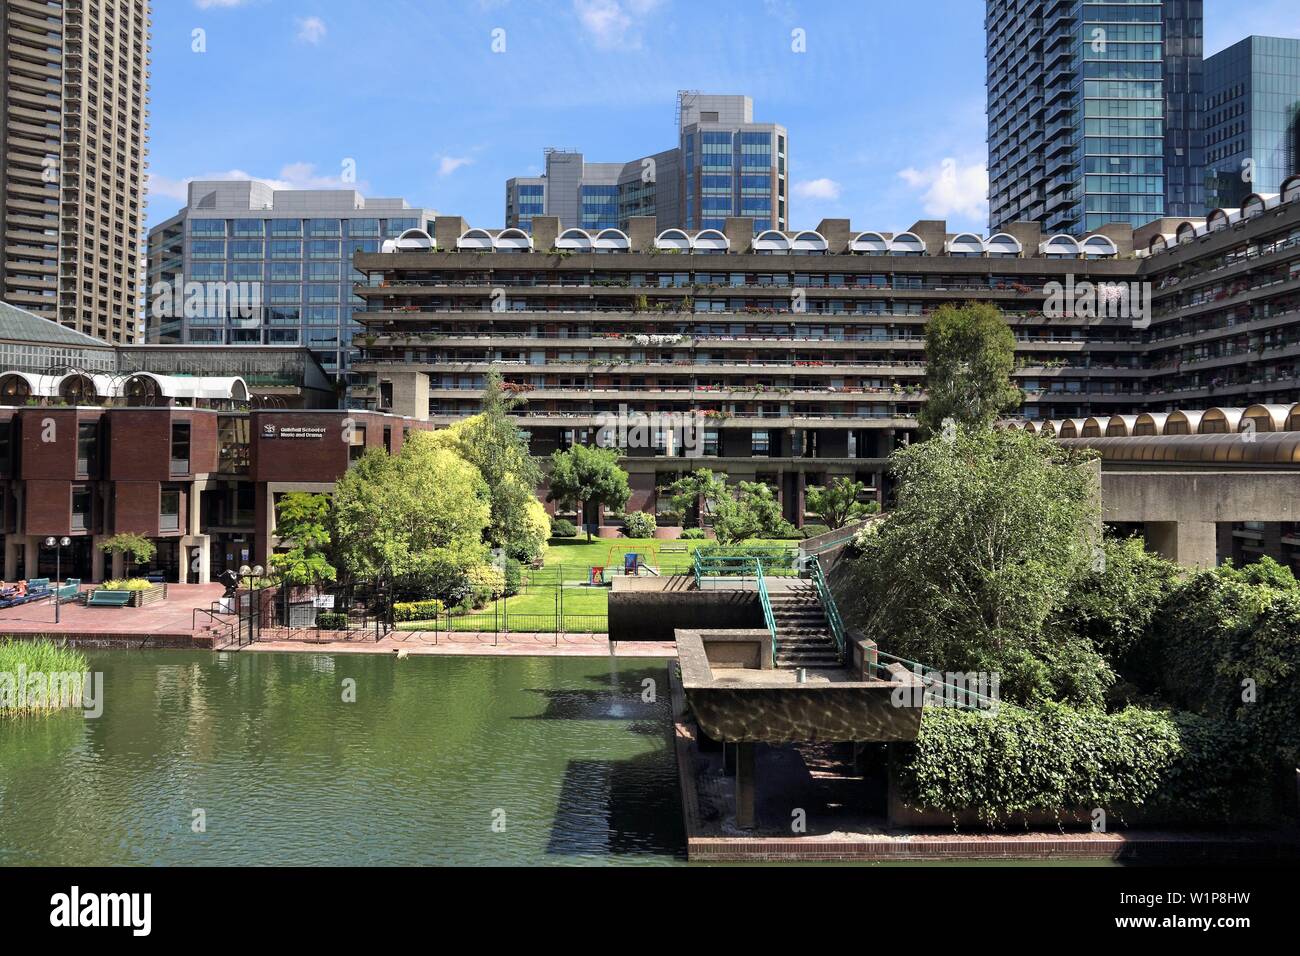 LONDON, UK - JULY 6, 2016: Barbican Estate in the City of London. The brutalist style residential estate was built in 1960s and '70s. Stock Photo